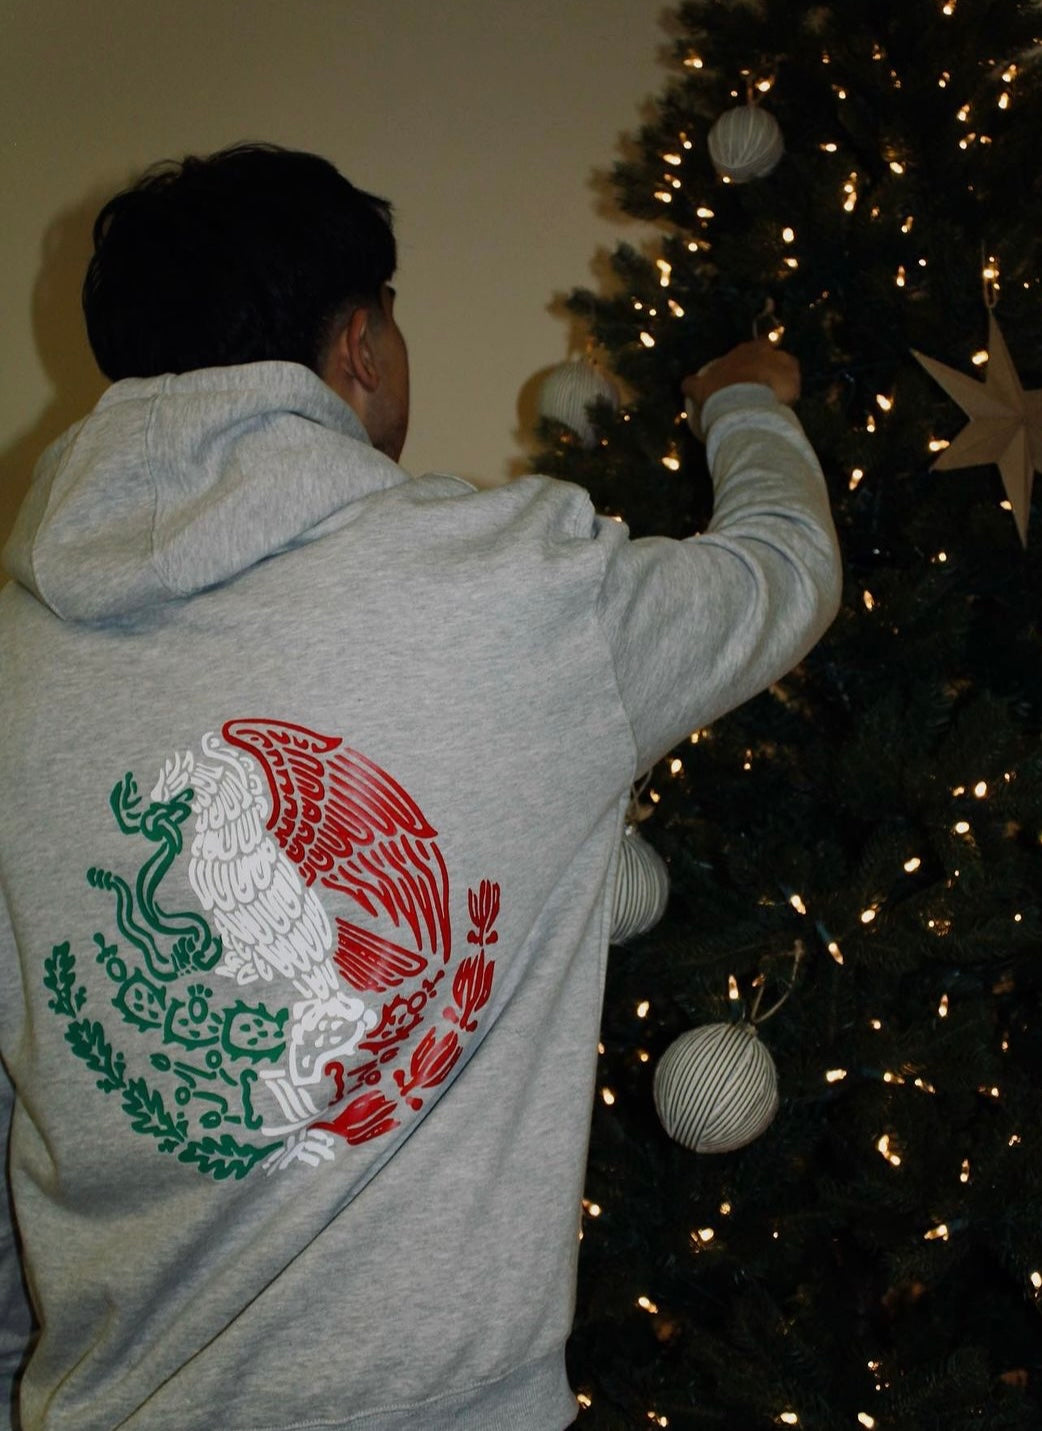 100% Mexican hoodie